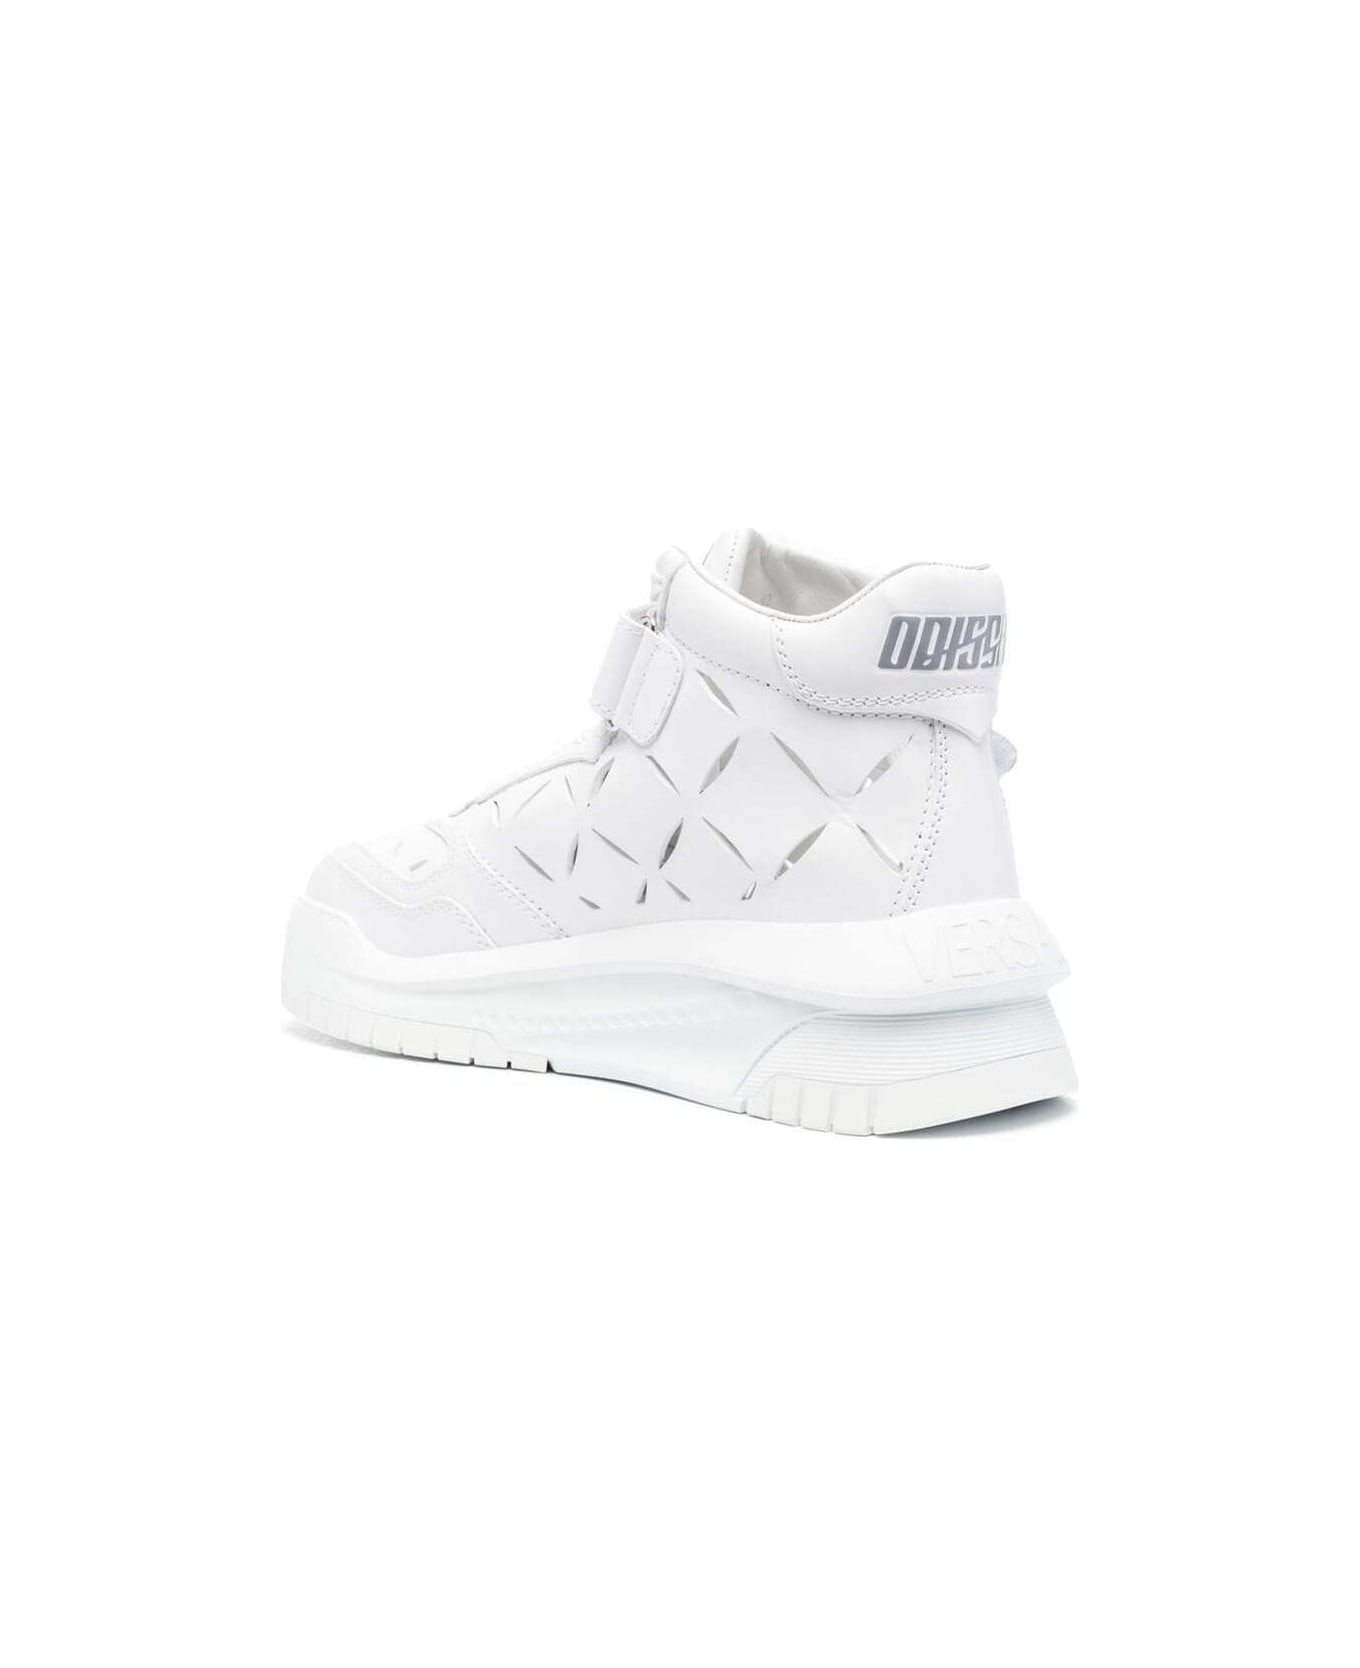 Versace High Top Odyssey Sneakers In White Leather Man - White